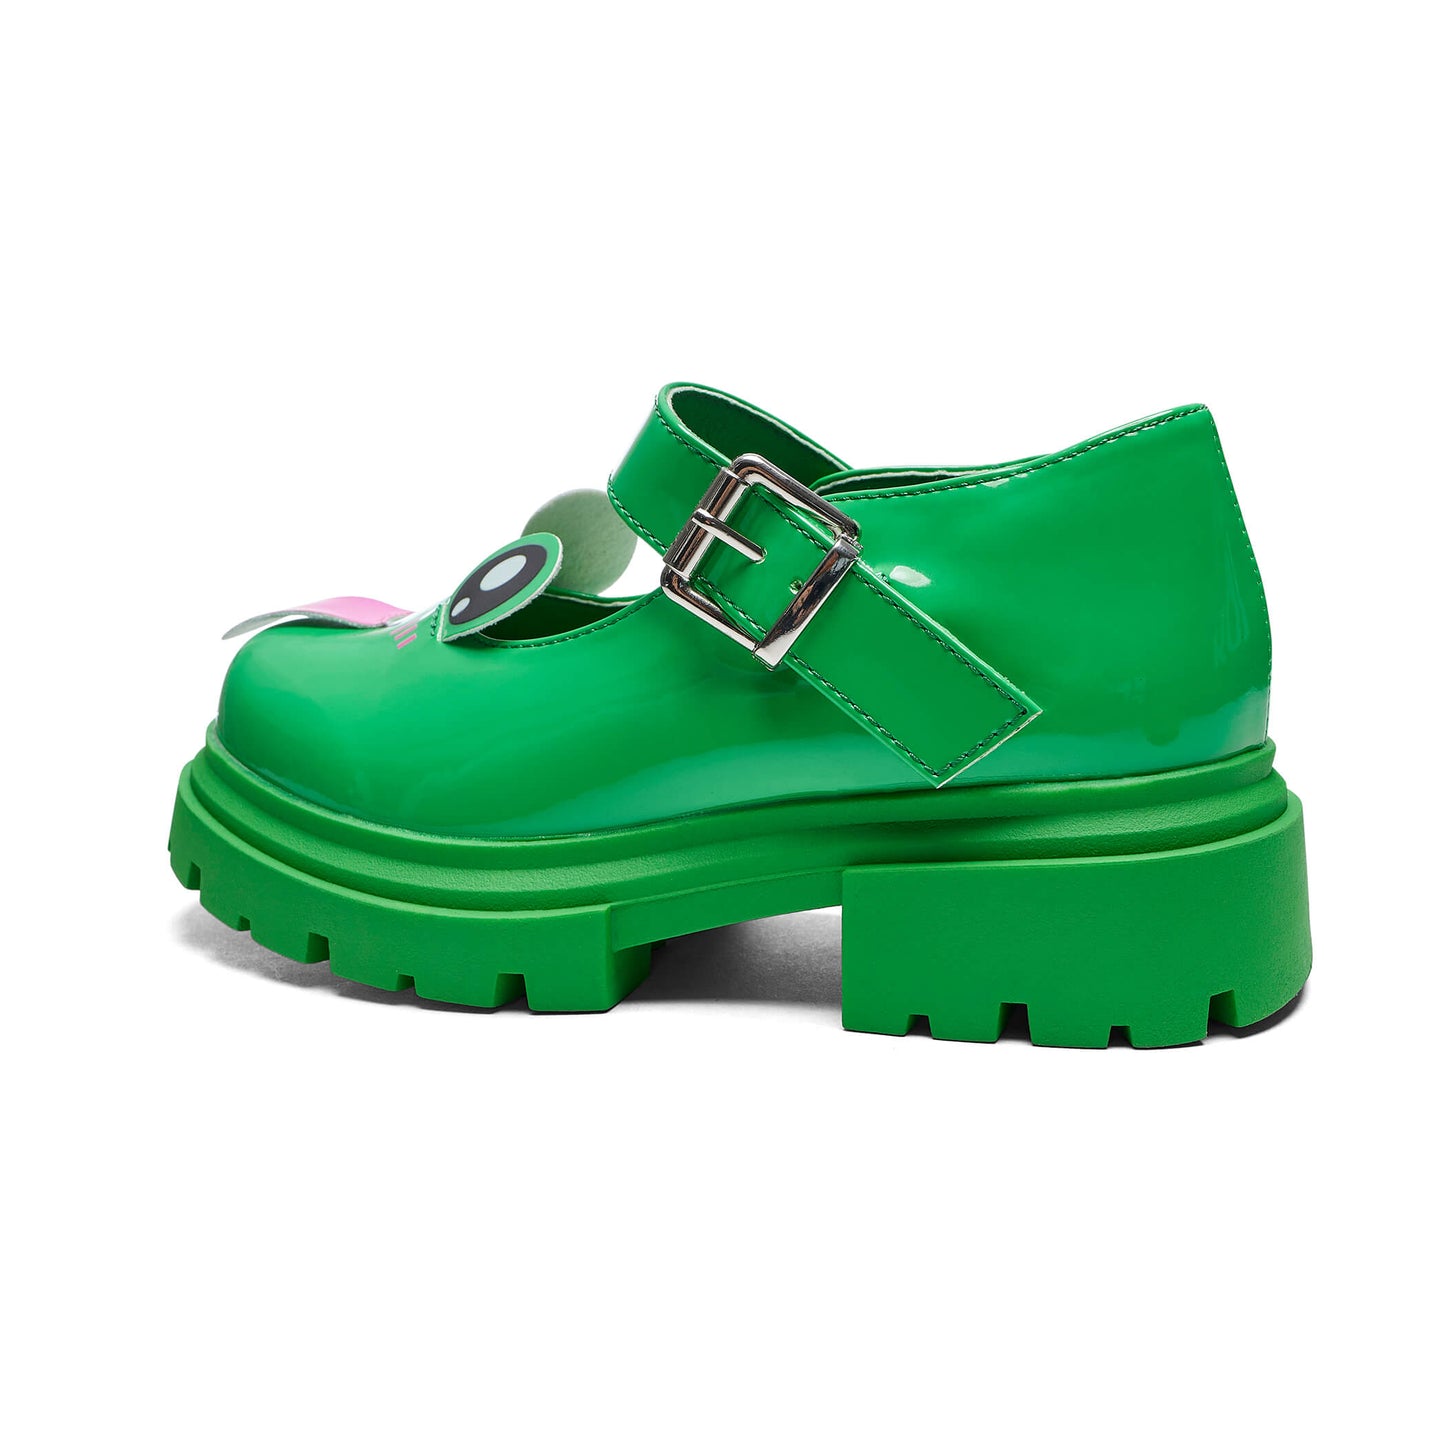 Lil’ Tira Cheeky Frog Mary Janes - Mary Janes - KOI Footwear - Green - Back Detail